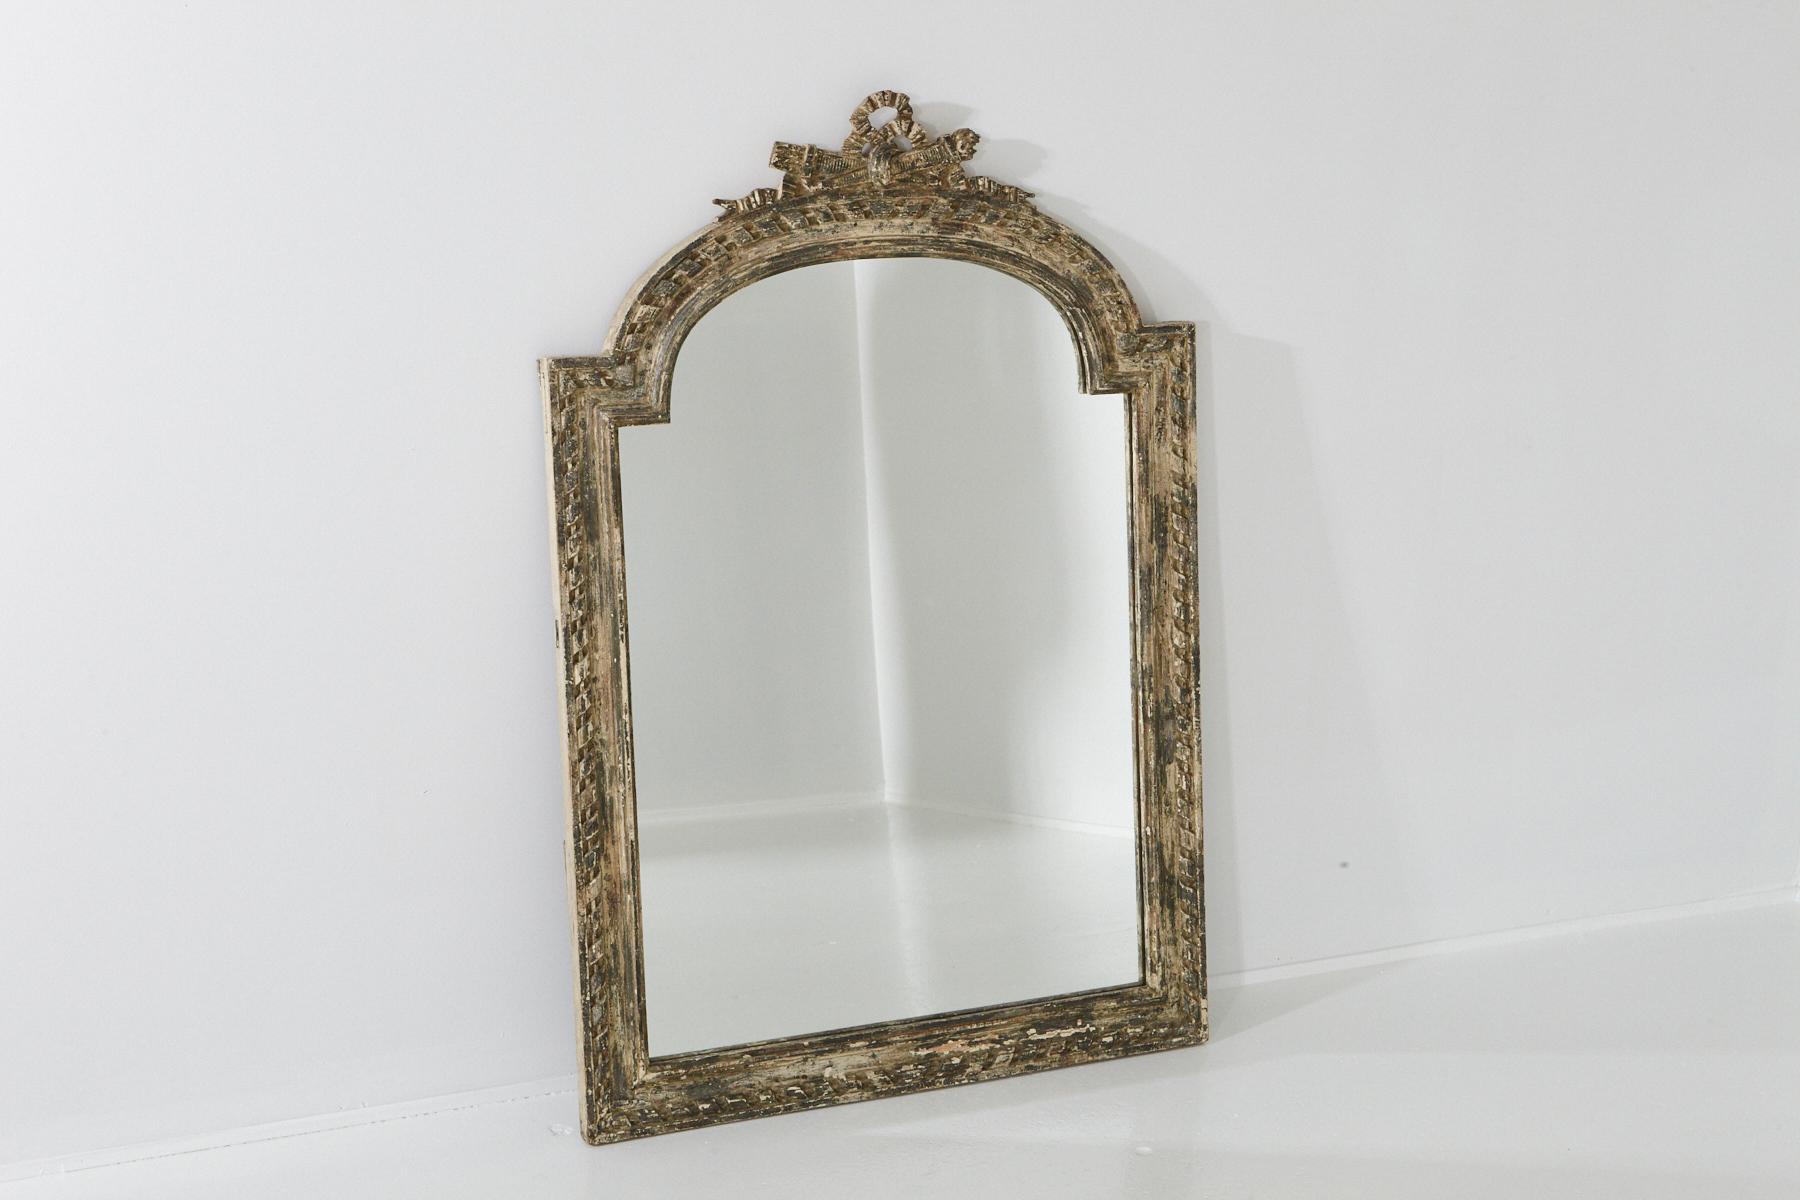 Large Louis XV style carved wall mirror with a distressed finish which is a style element, circa mid-19th century. The frame shows some paint loss, otherwise very solid, the mirror is in very good condition.